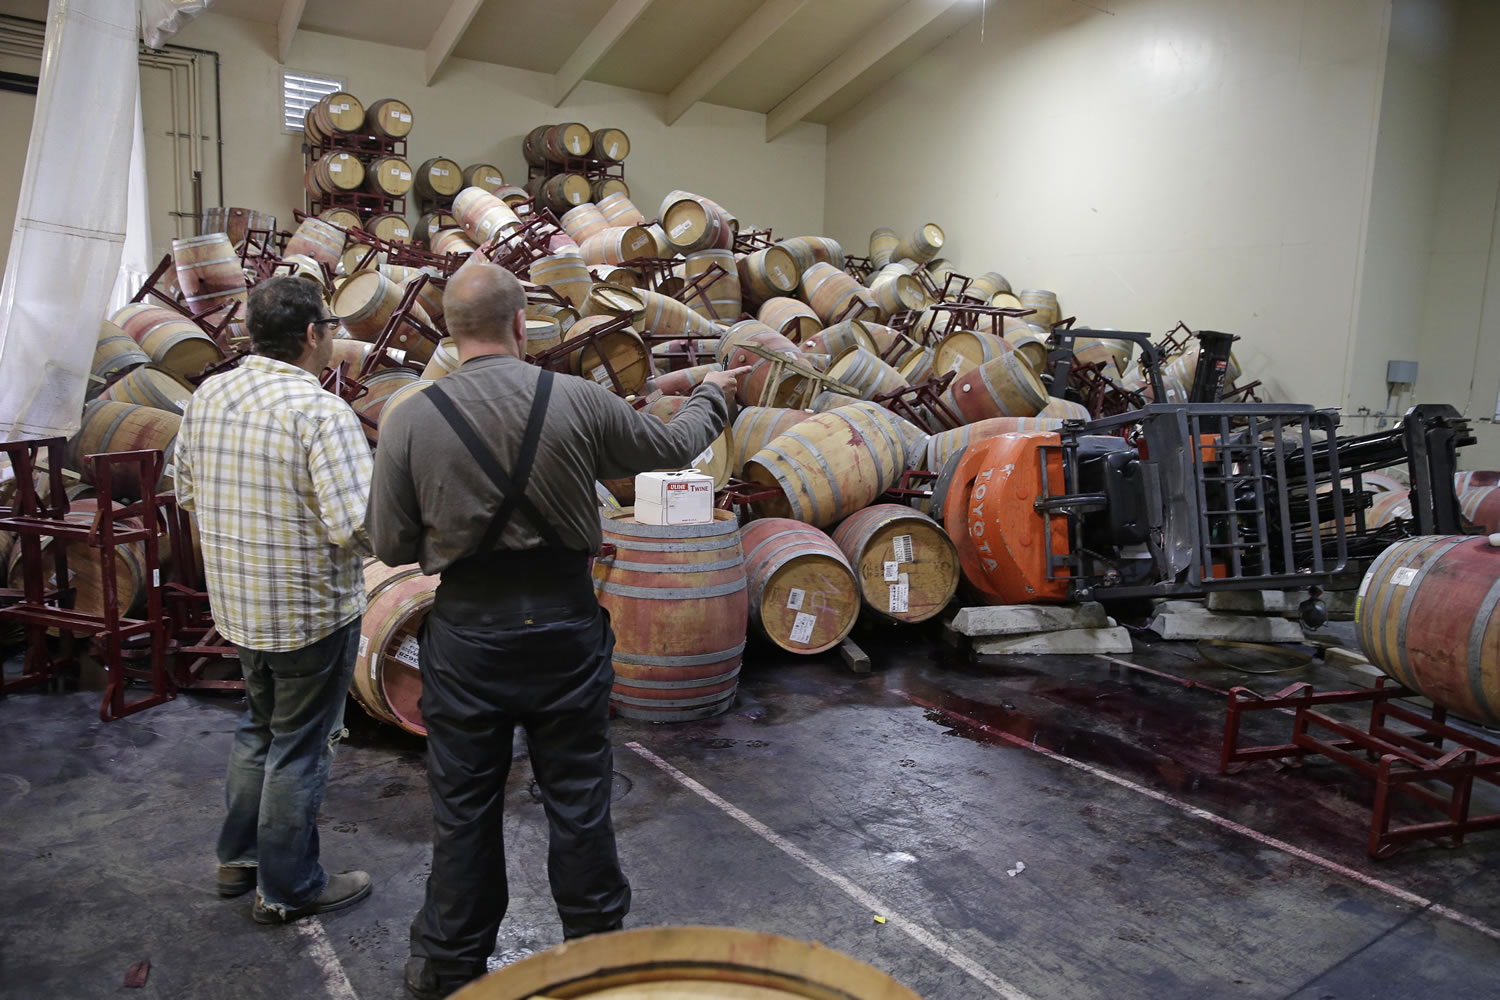 Jeremy Weiss, left, and cellar worker Adam Craig, right, look over some of the hundreds of earthquake damaged wine barrels that covered and toppled a pair of forklifts at the Kieu Hoang Winery on Monday in Napa, Calif.